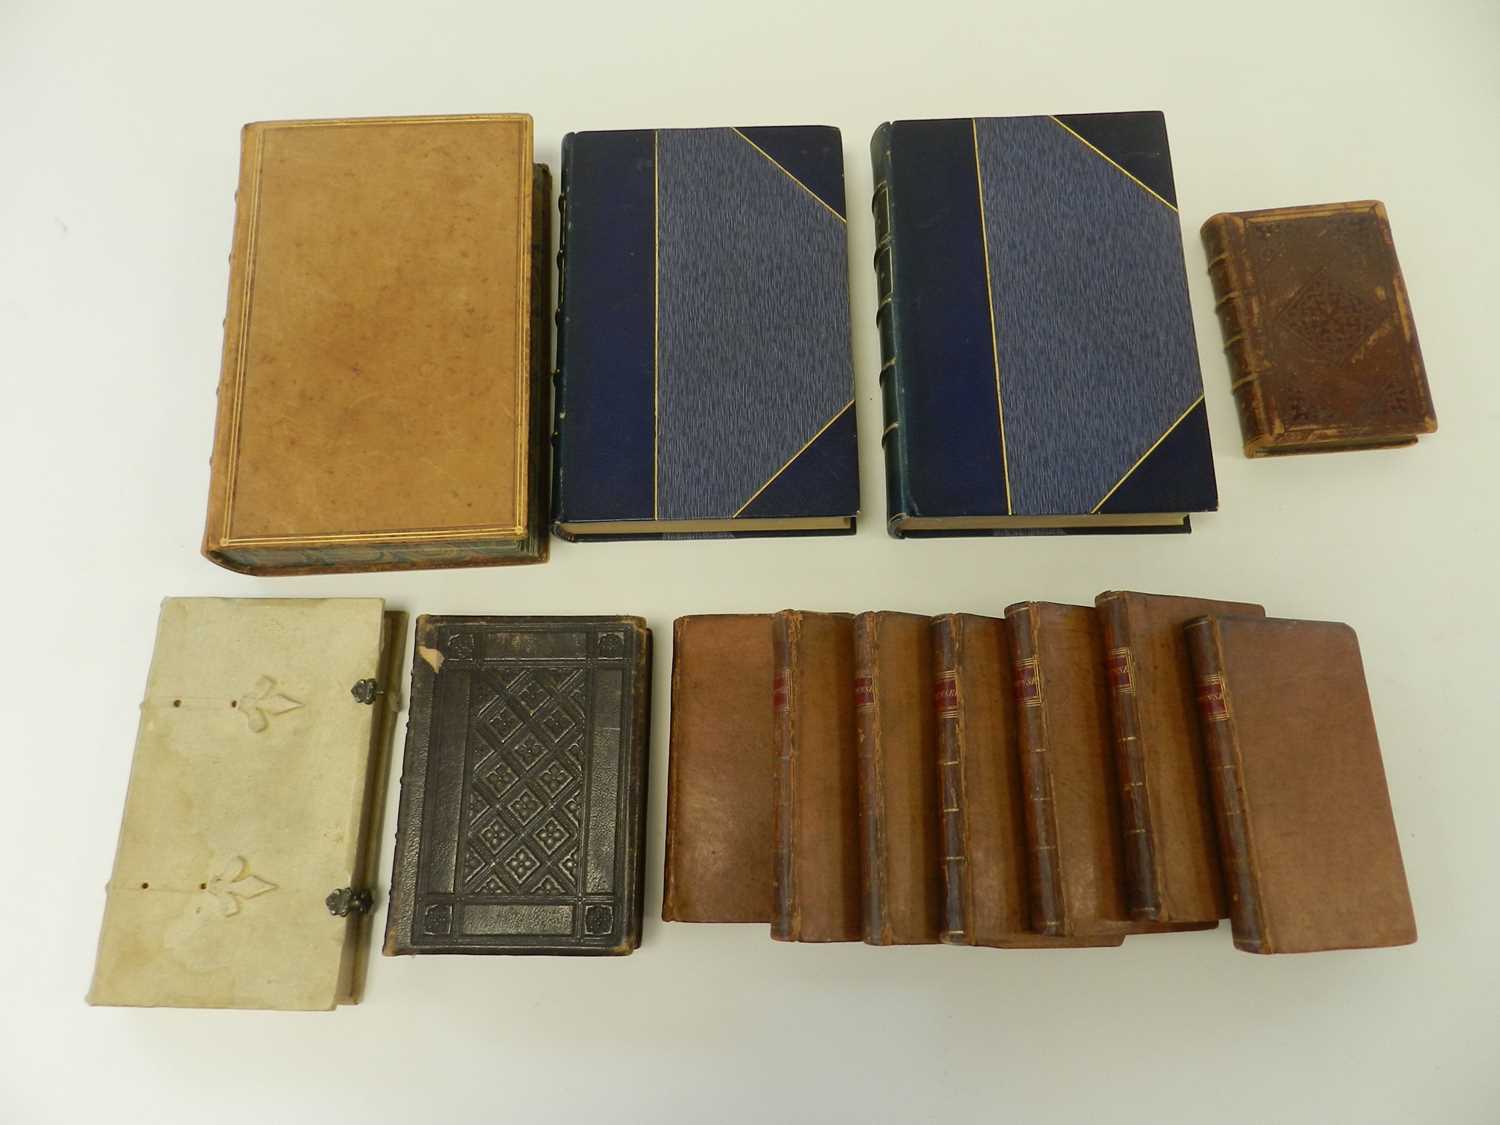 Diary of Samuel Pepys, 2 vols 1924. Half blue morocco. With other bindings (box) - Image 2 of 3